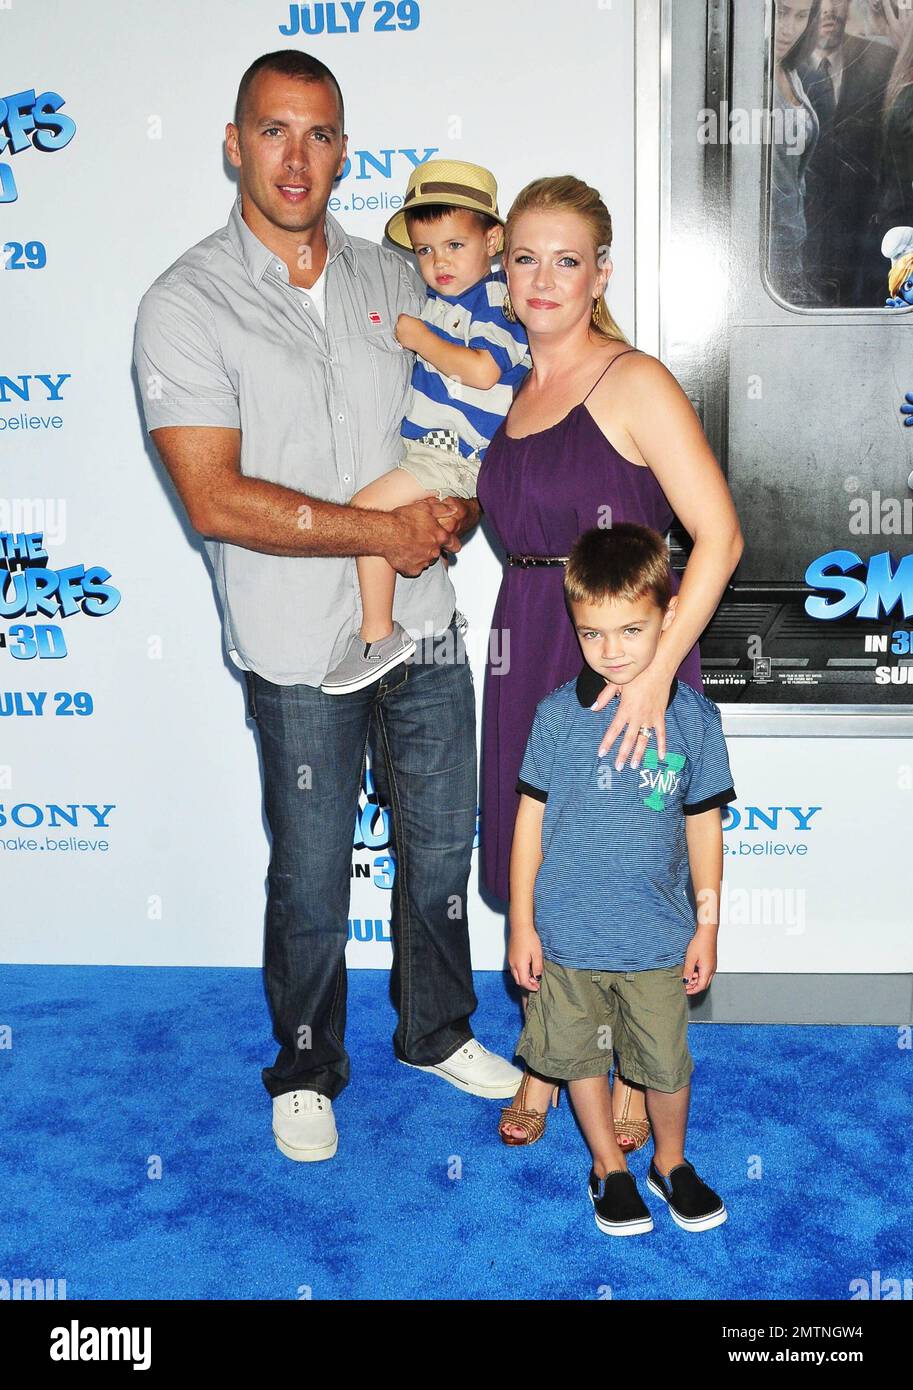 Melissa Joan Hart and family at the Word Premiere of Columbia Pictures' 'Smurfs' at the Ziegfeld Theater.  New York, NY 7/24/2011   . Stock Photo